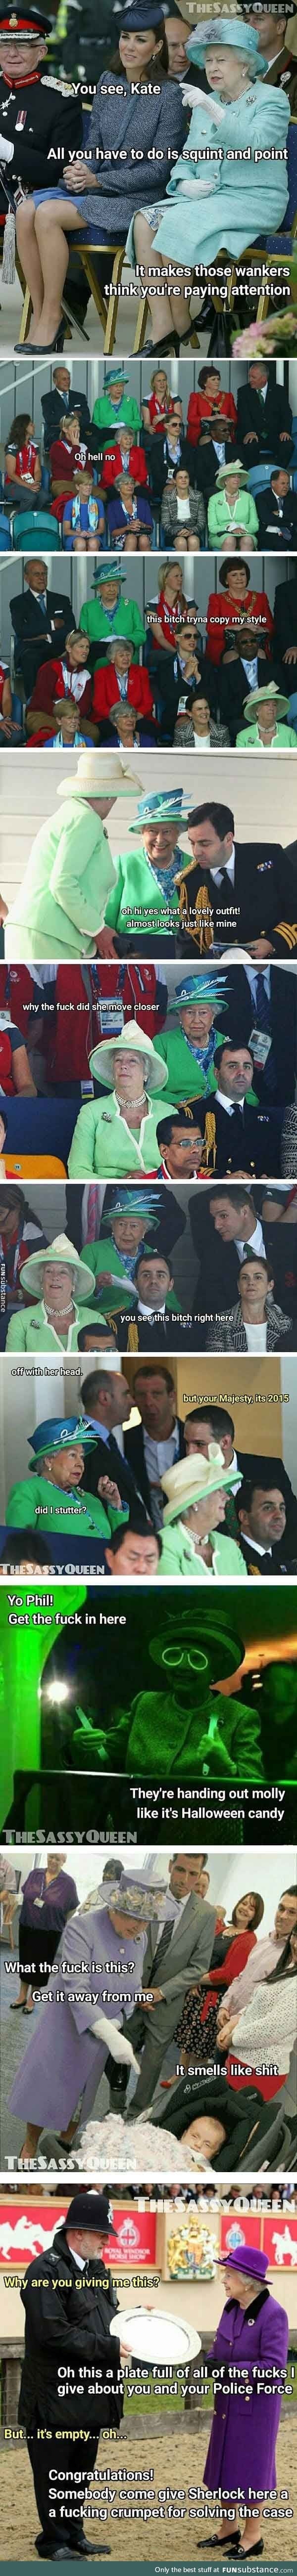 The Queen is sassy